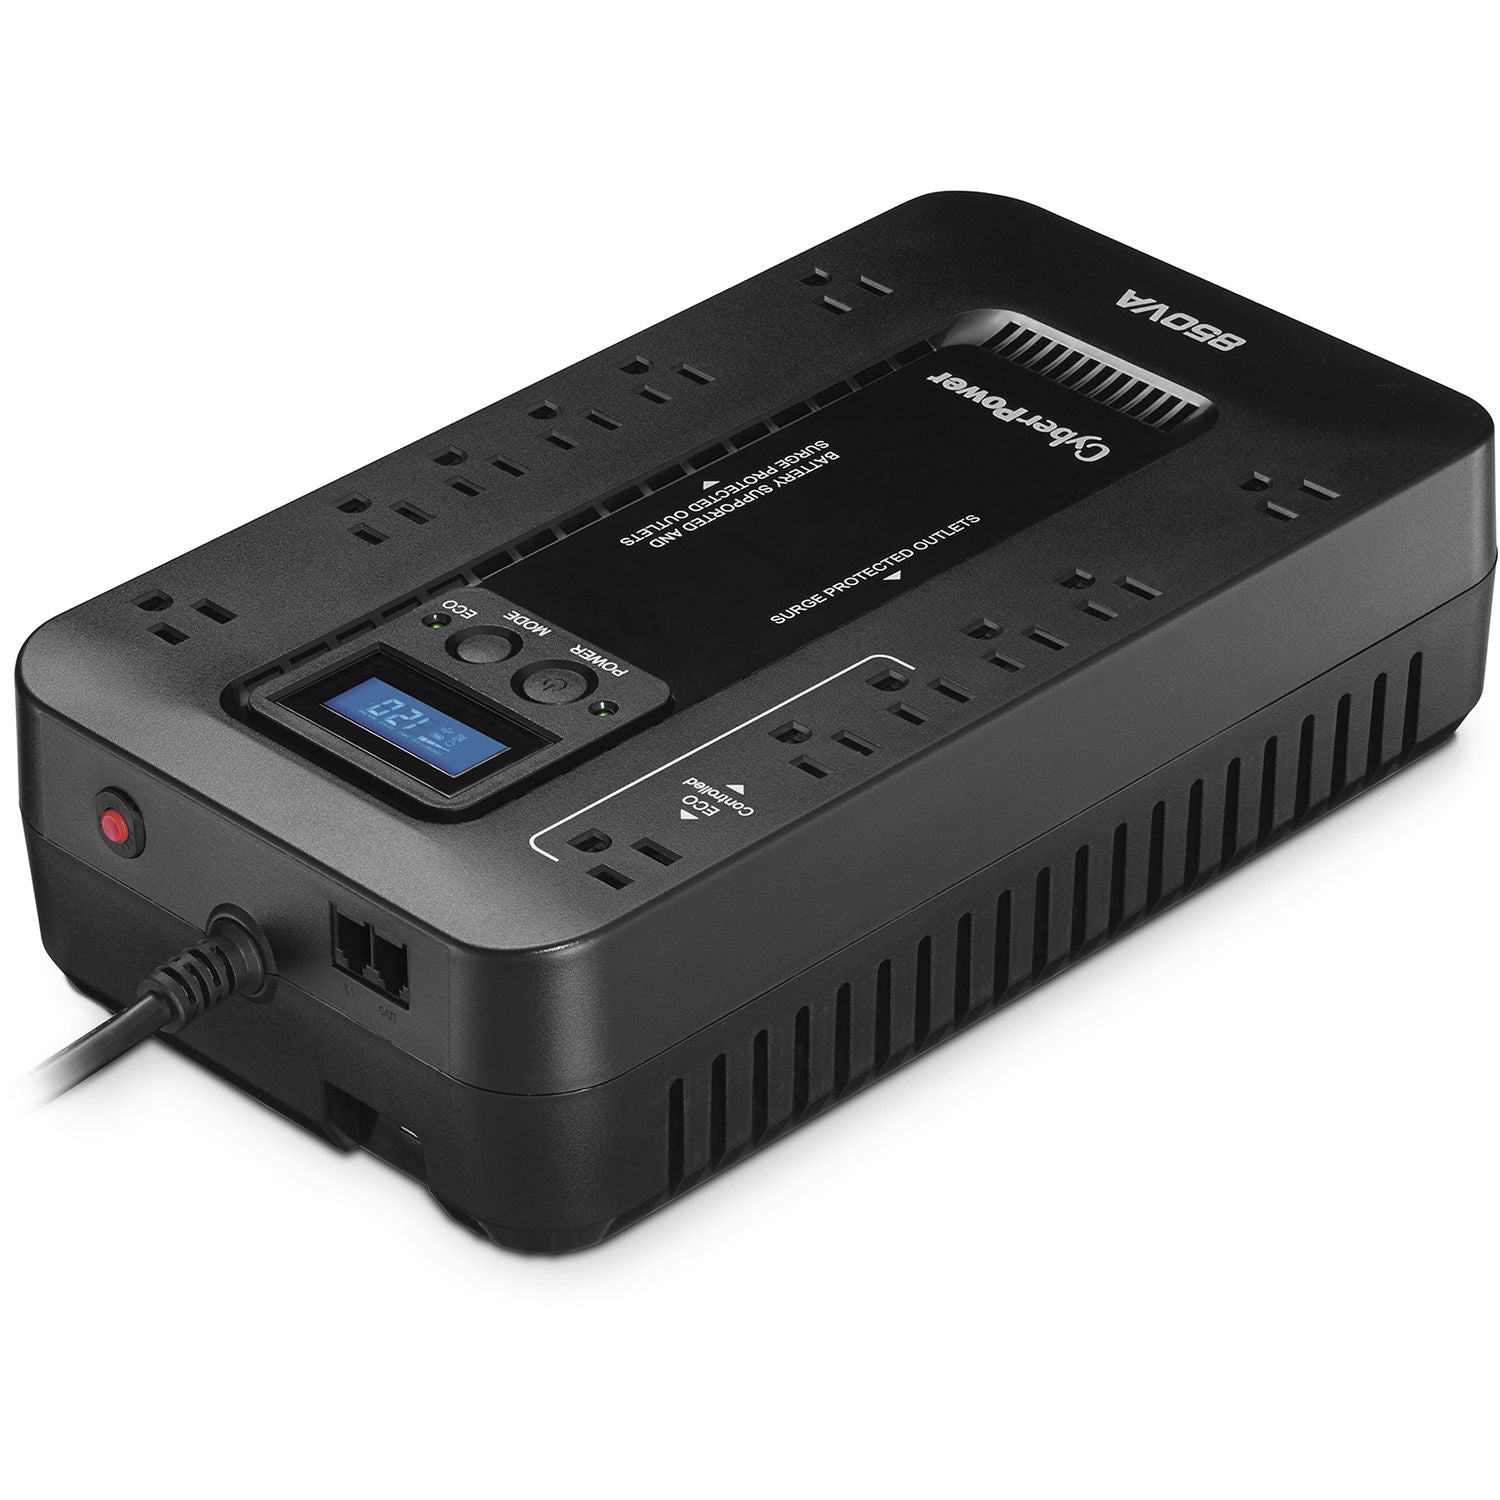 CyberPower EC850LCD-R 850VA/510W 12 Outlets Ecologic Series Uninterruptible Power Supply UPS - Certified Refurbished